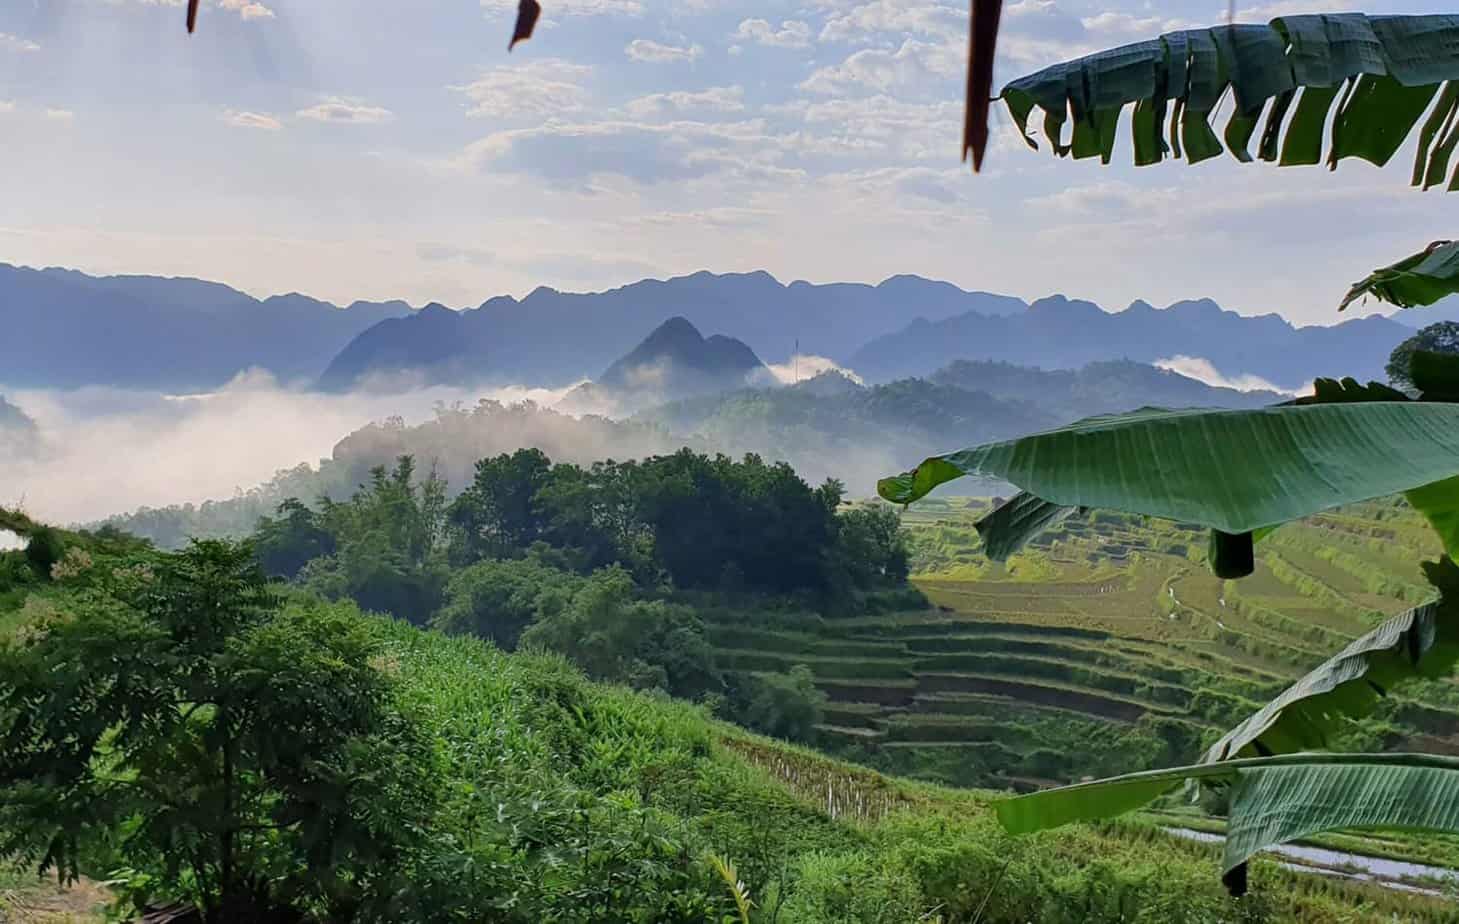 National Parks in Vietnam - Pu Luong